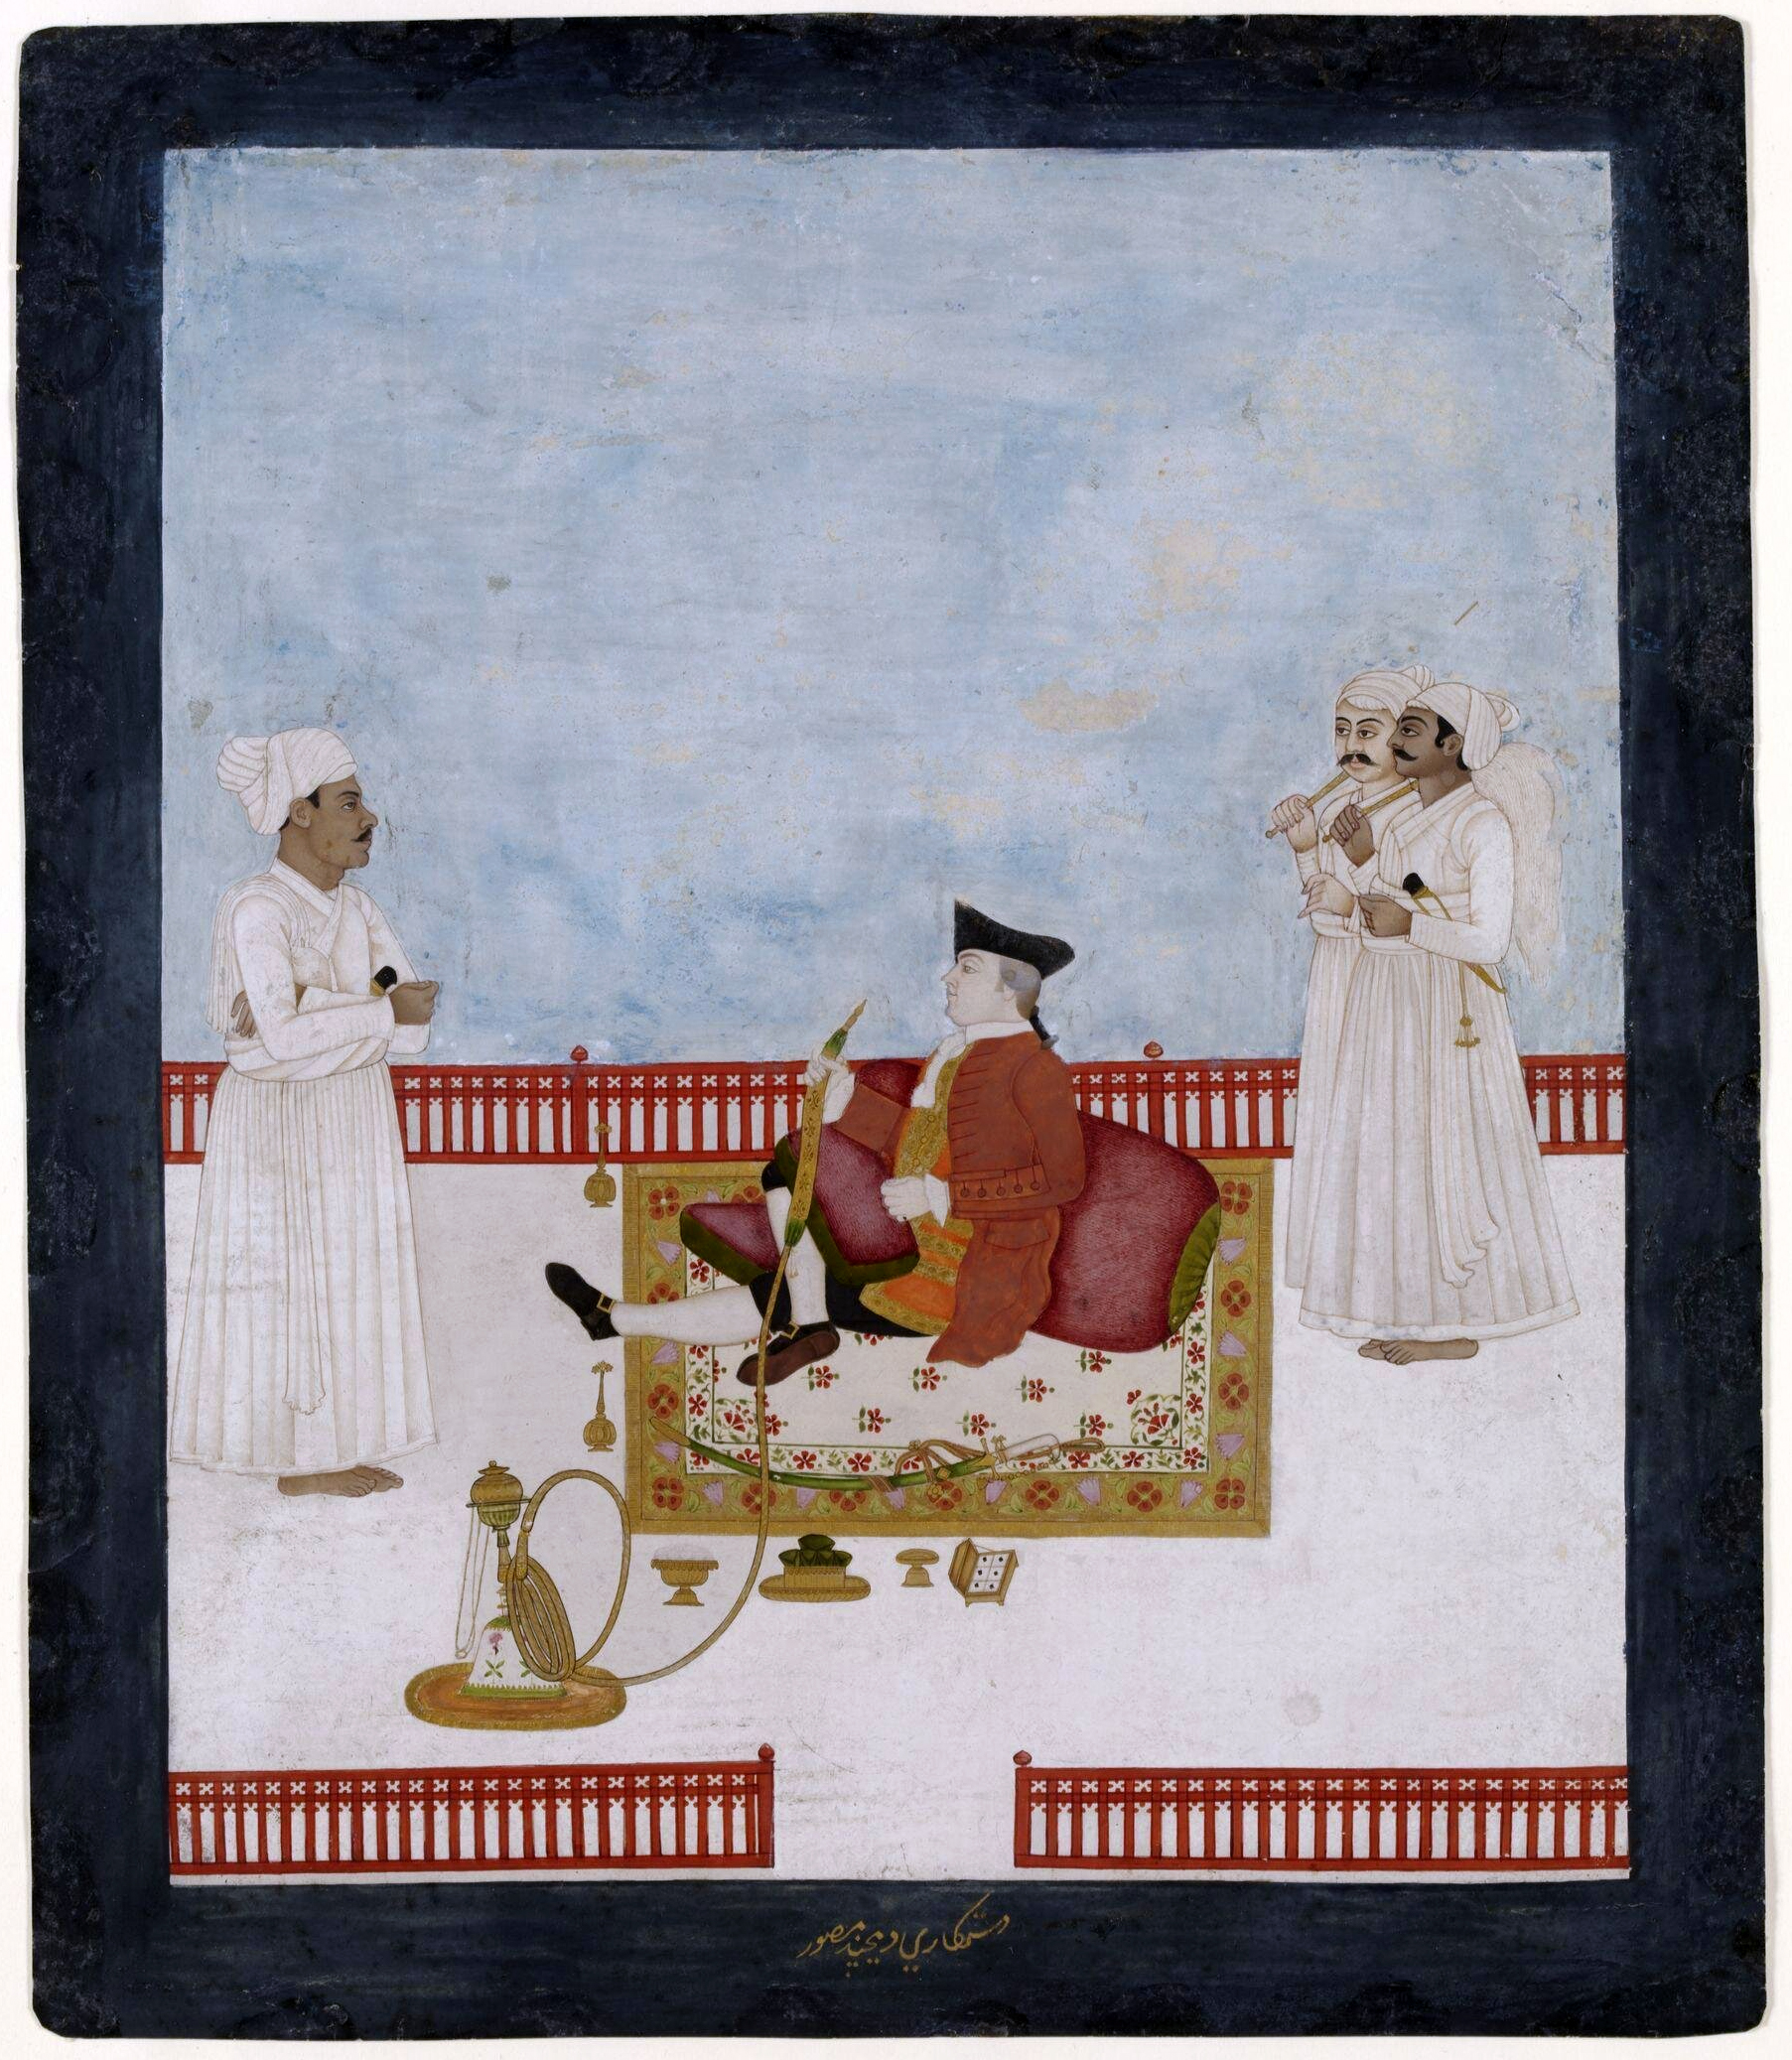 Dip Chand, Portrait of East India Company official (likely William Fullerton), c. 1760–64 (Murshidabad, India), opaque watercolor on paper, 26.2 x 22.6 cm (Victoria & Albert Museum, London)